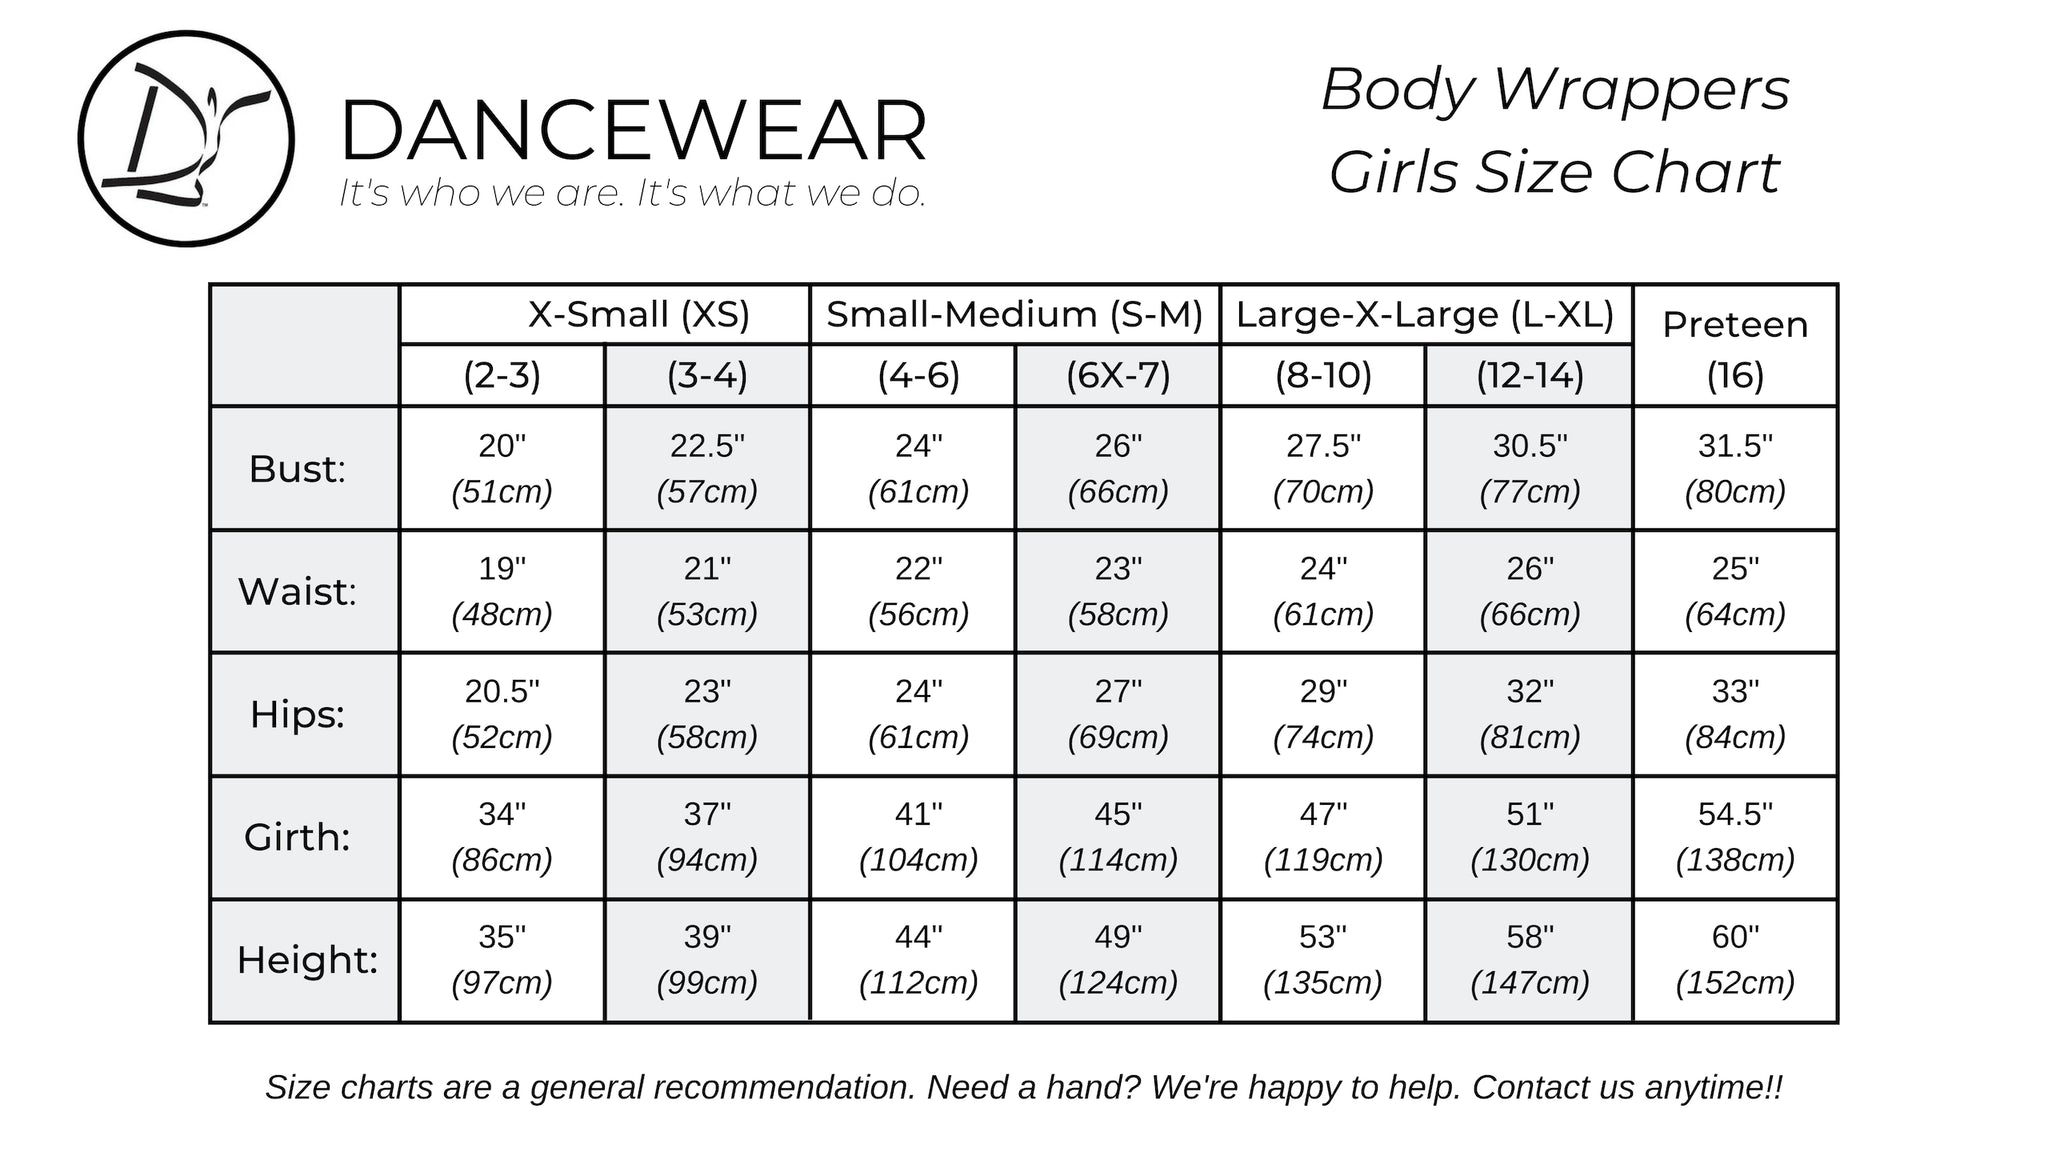 Body Wrappers Girls Size Chart